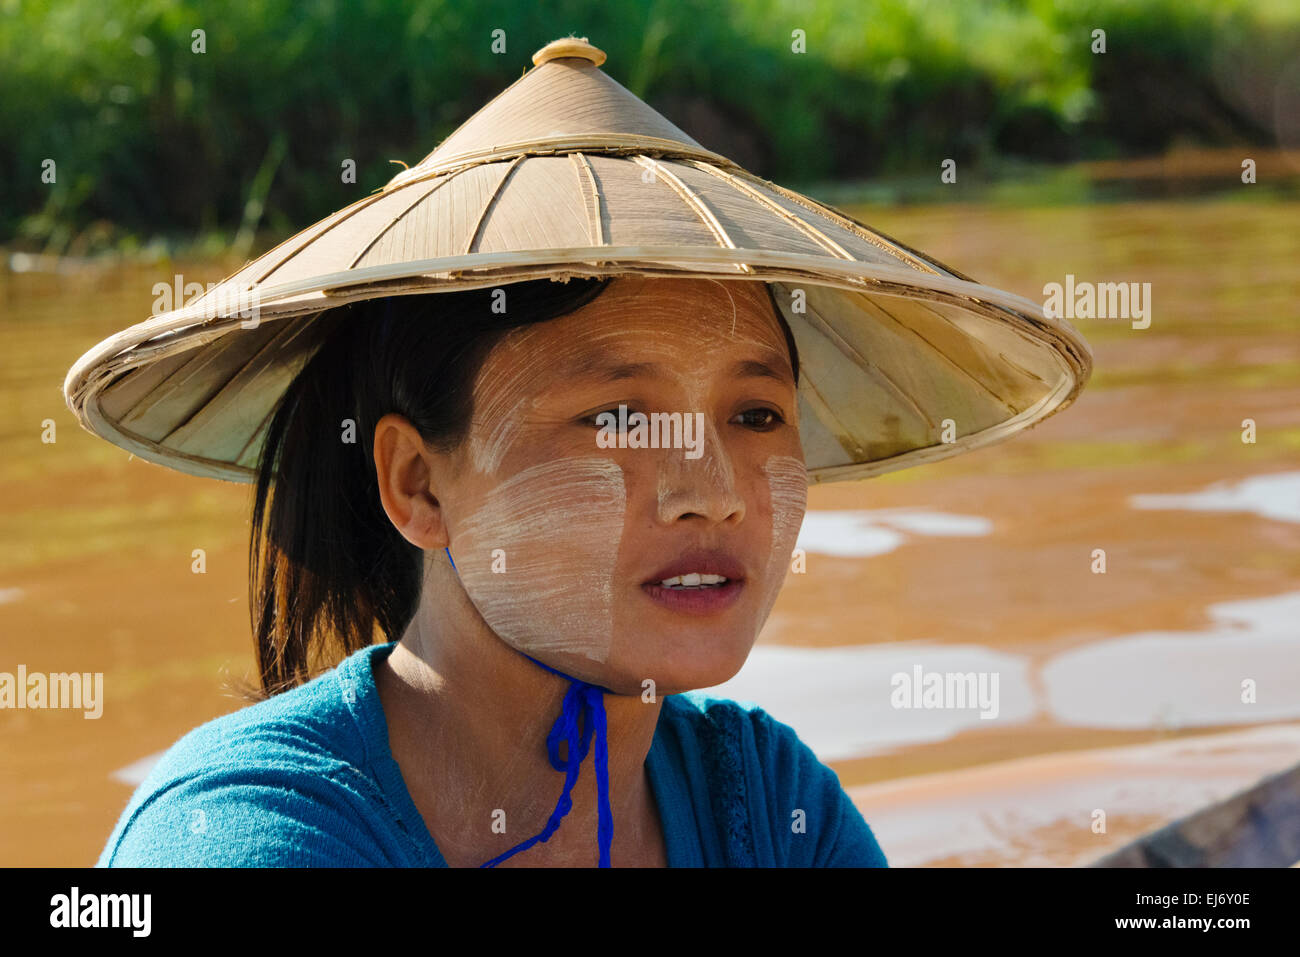 Portrait of a girl wearing conical hat with face painted white by sunblock, Inle Lake, Shan State, Myanmar Stock Photo